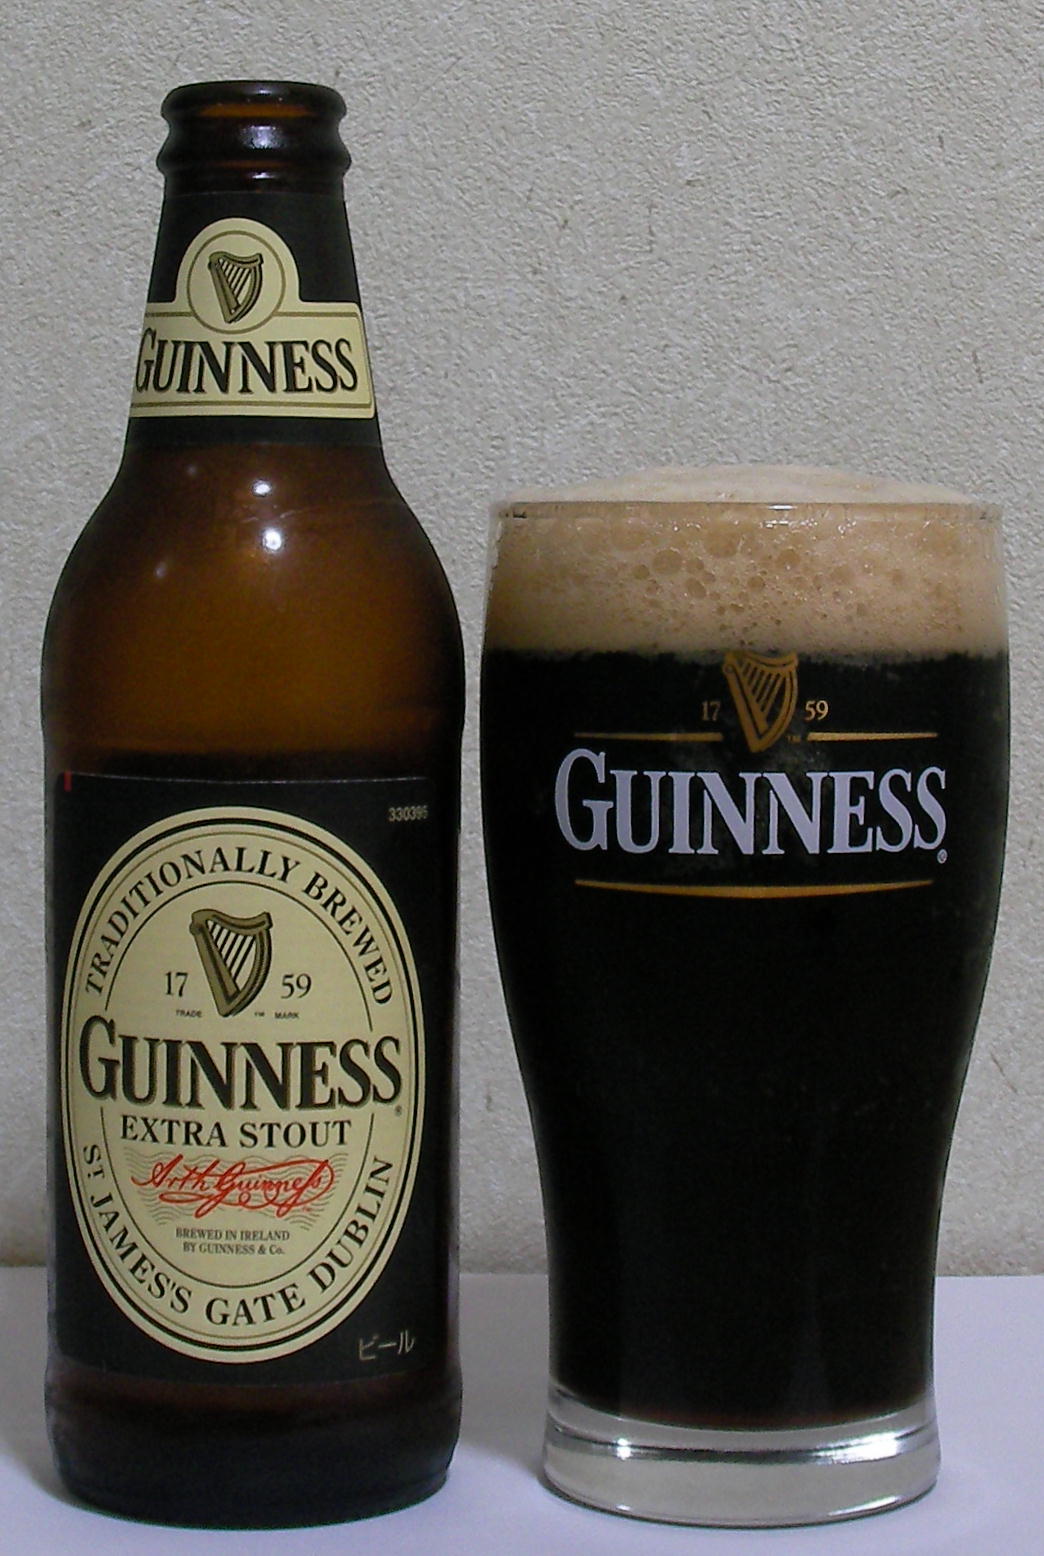 Worst Beers: Guinness Extra Stout - Guinness Extra Stout is quite high on the calorie scale, so why not opt for the black stuff on tap instead? Its 176 calories is a full 50 calories higher than the draught version of the greatest stuff on earth.